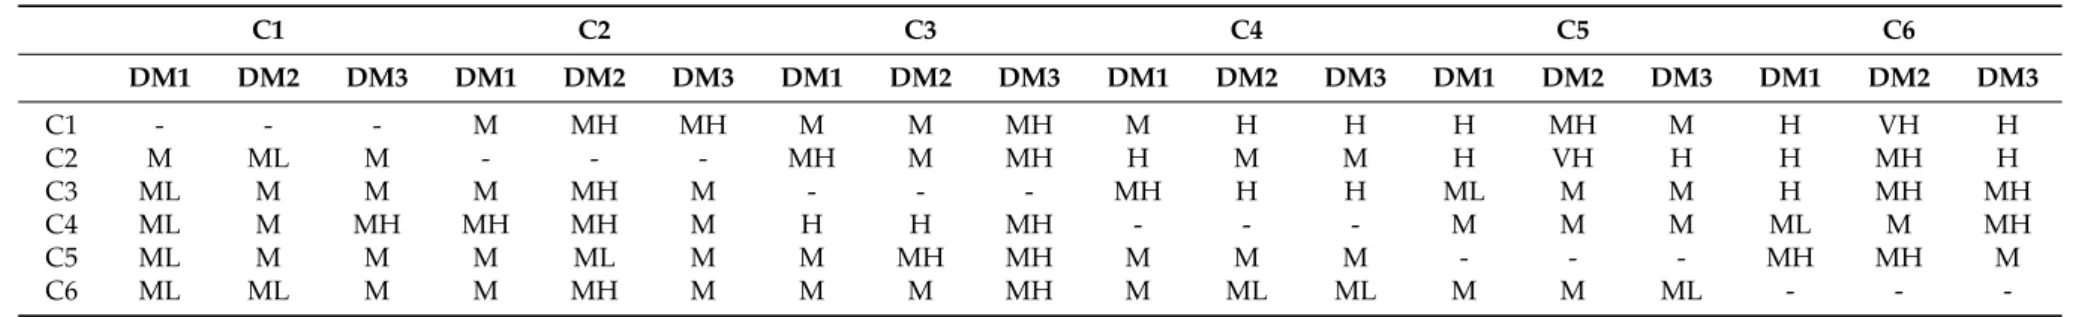 Table 3. Linguistic evaluations for the direct relation matrix. C1 C2 C3 C4 C5 C6 DM1 DM2 DM3 DM1 DM2 DM3 DM1 DM2 DM3 DM1 DM2 DM3 DM1 DM2 DM3 DM1 DM2 DM3 C1 - - - M MH MH M M MH M H H H MH M H VH H C2 M ML M - - - MH M MH H M M H VH H H MH H C3 ML M M M MH